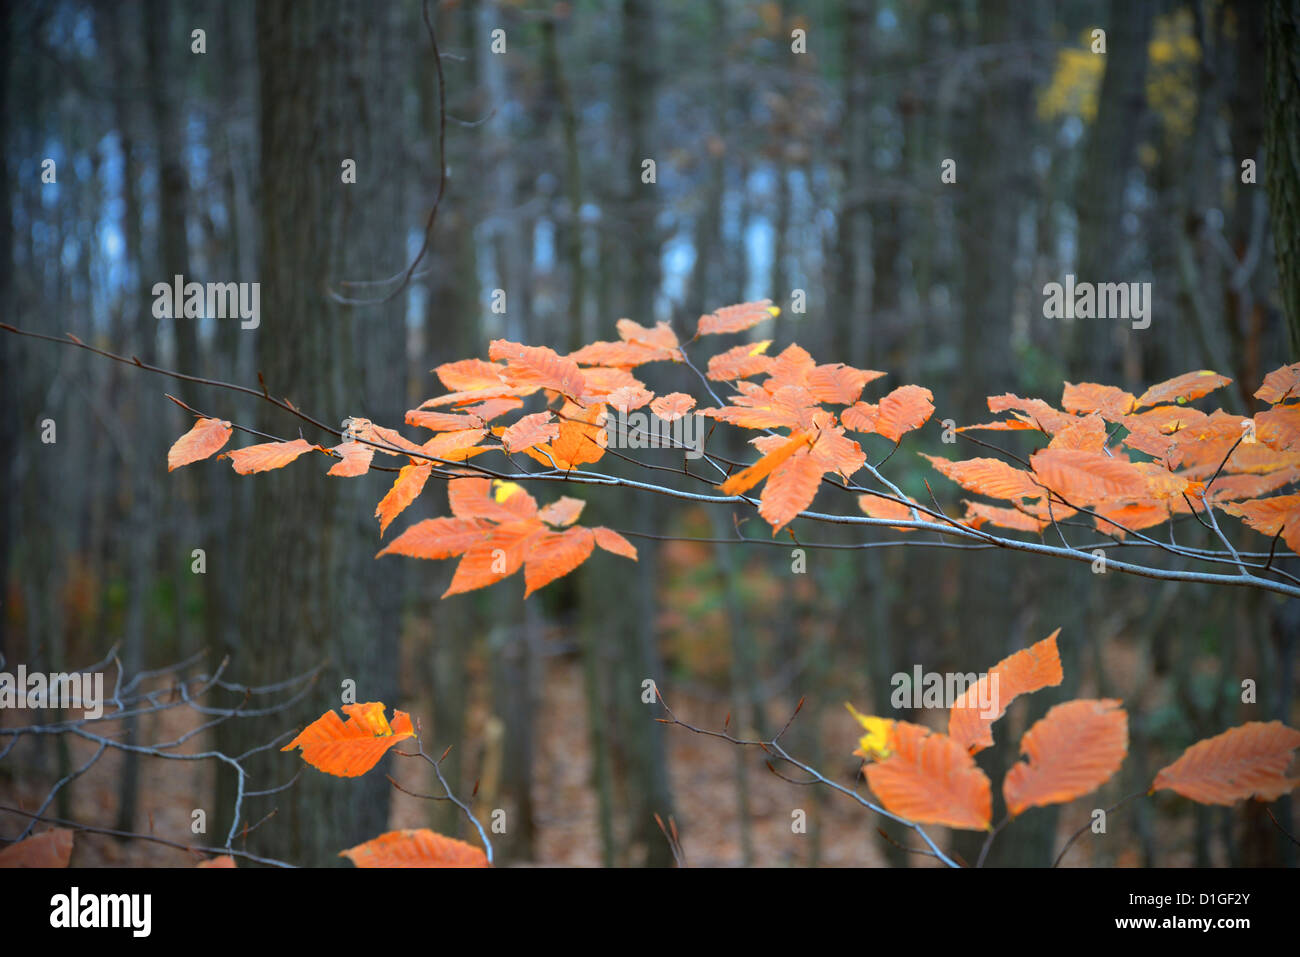 The Last Autumn Leaves On Tree In Forest, Pennsylvania, USA Stock Photo